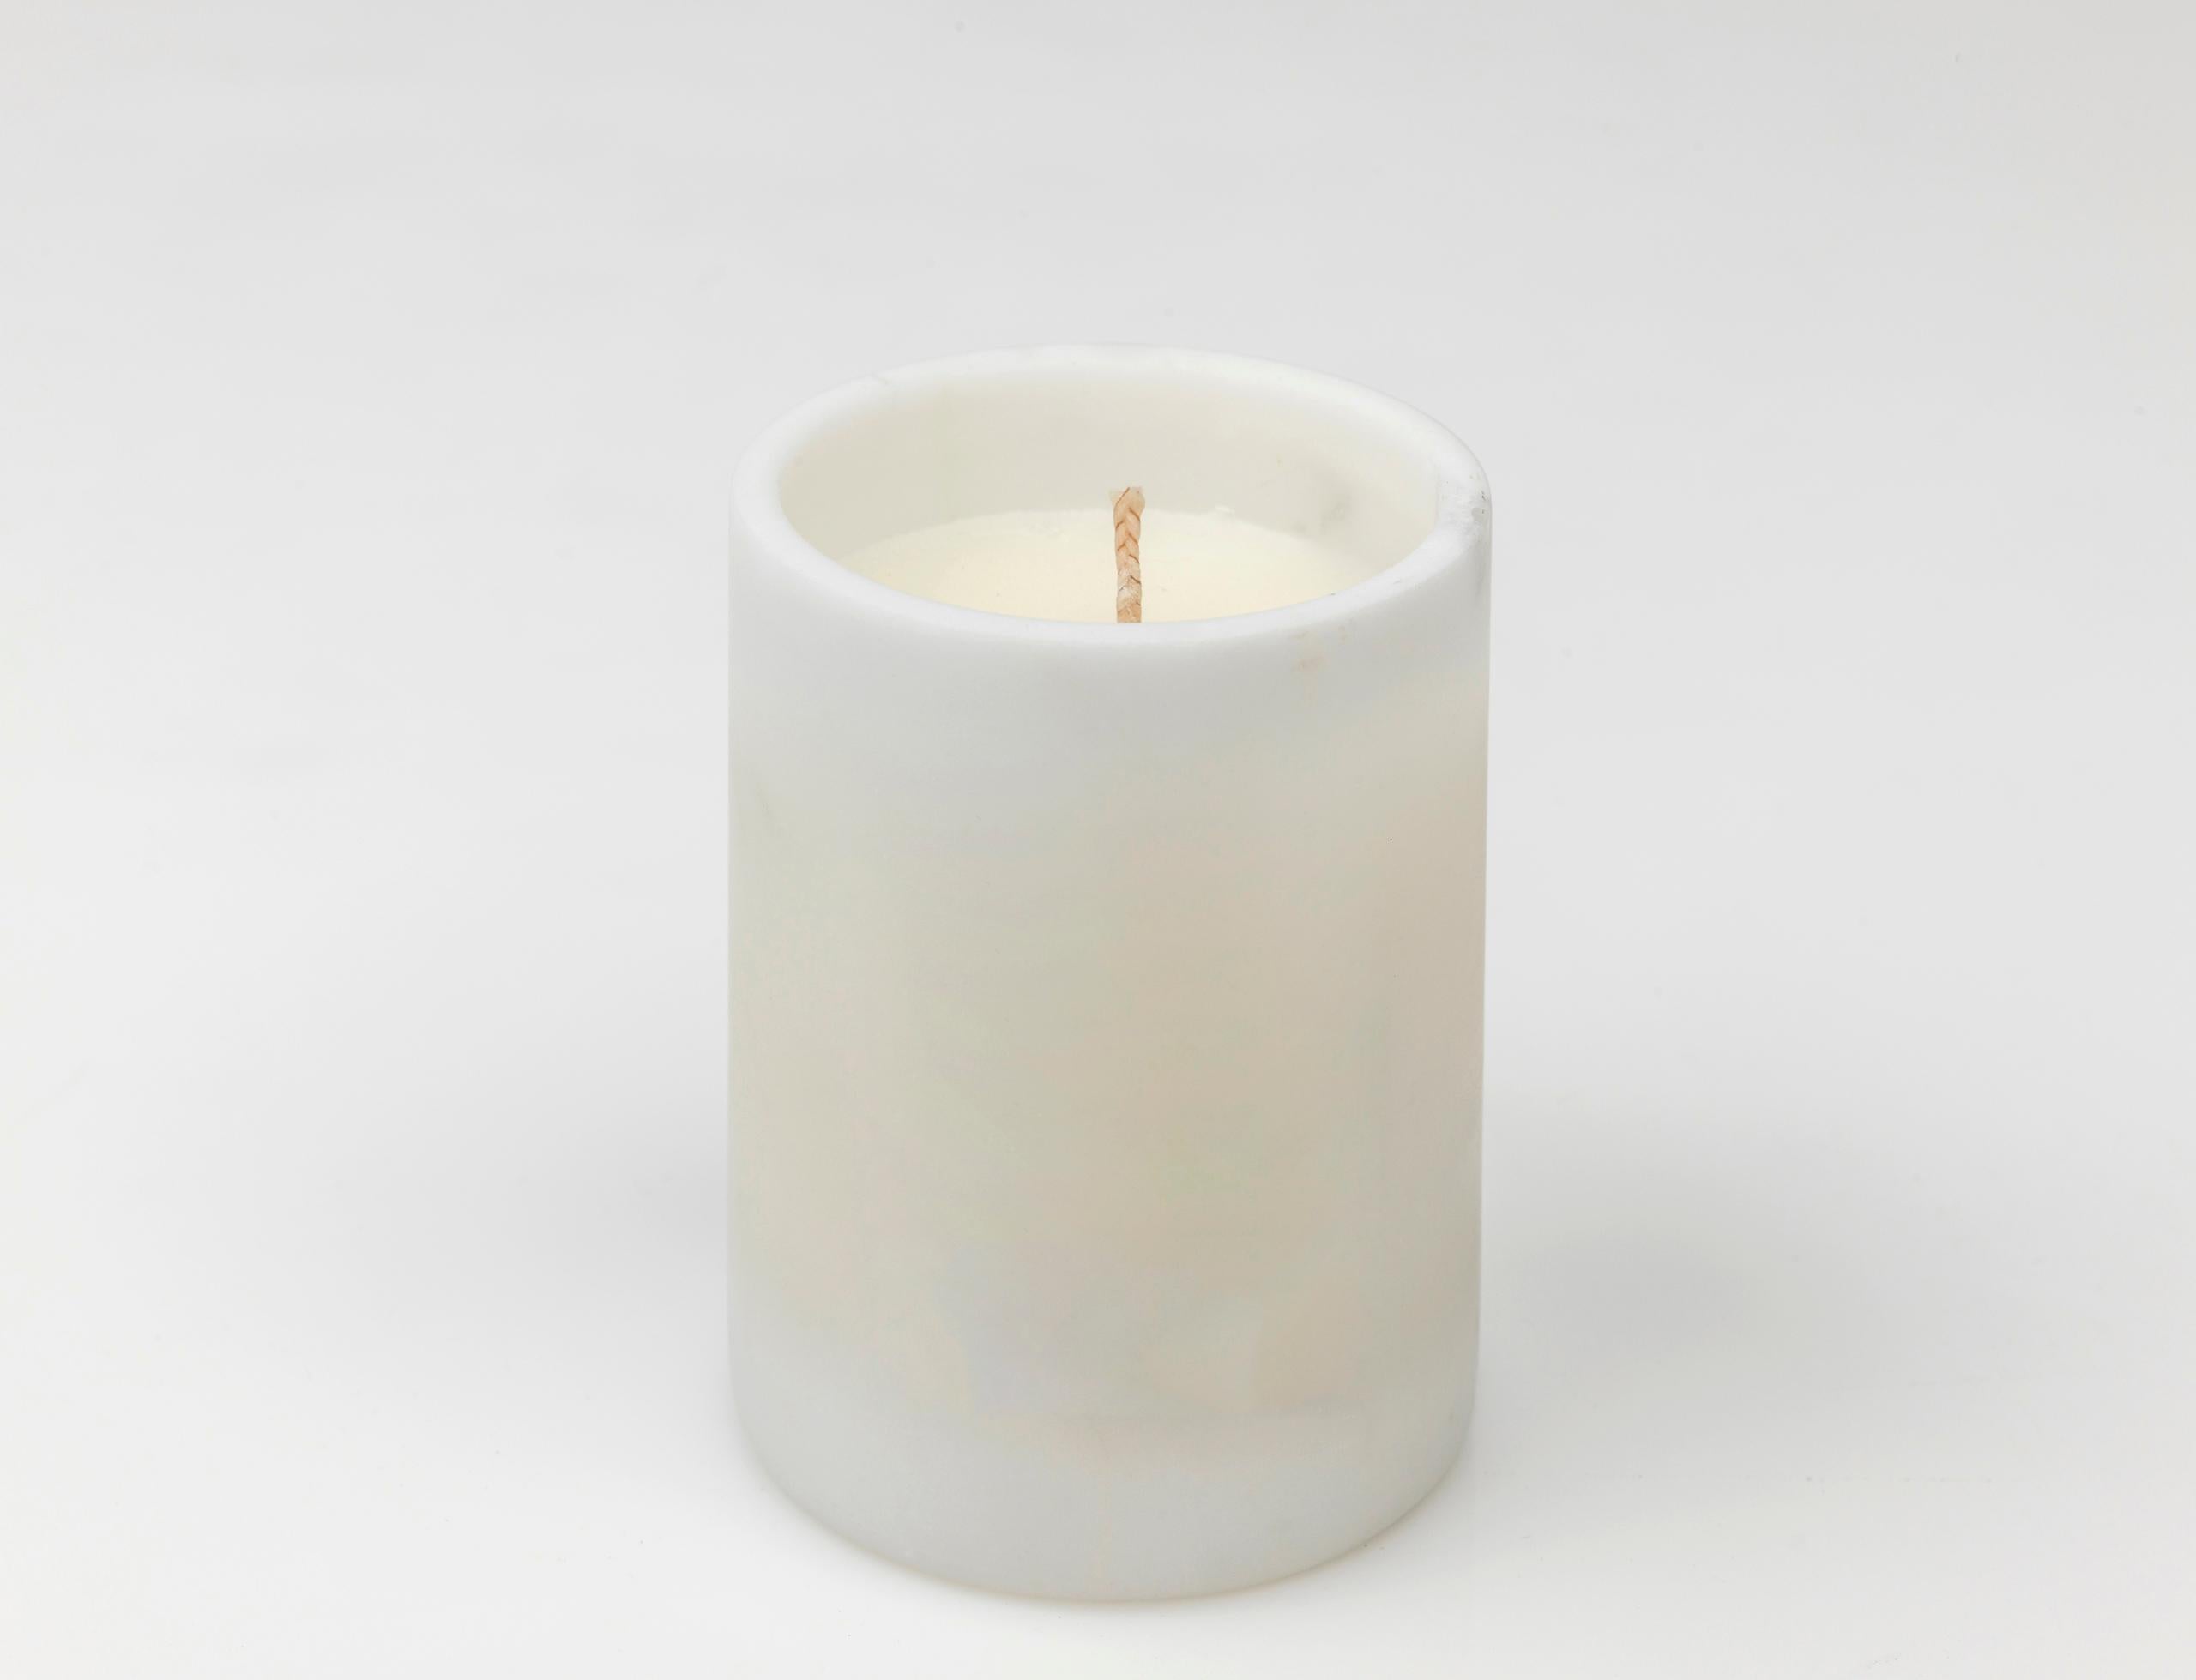 Rounded candle with external candle holder in white Carrara marble, contains scented wax, the fragrance is Lime and bamboo mix. The candle comes with a gift box as shown in the picture.
Zona67 is the name of the marble quarry that belongs to the